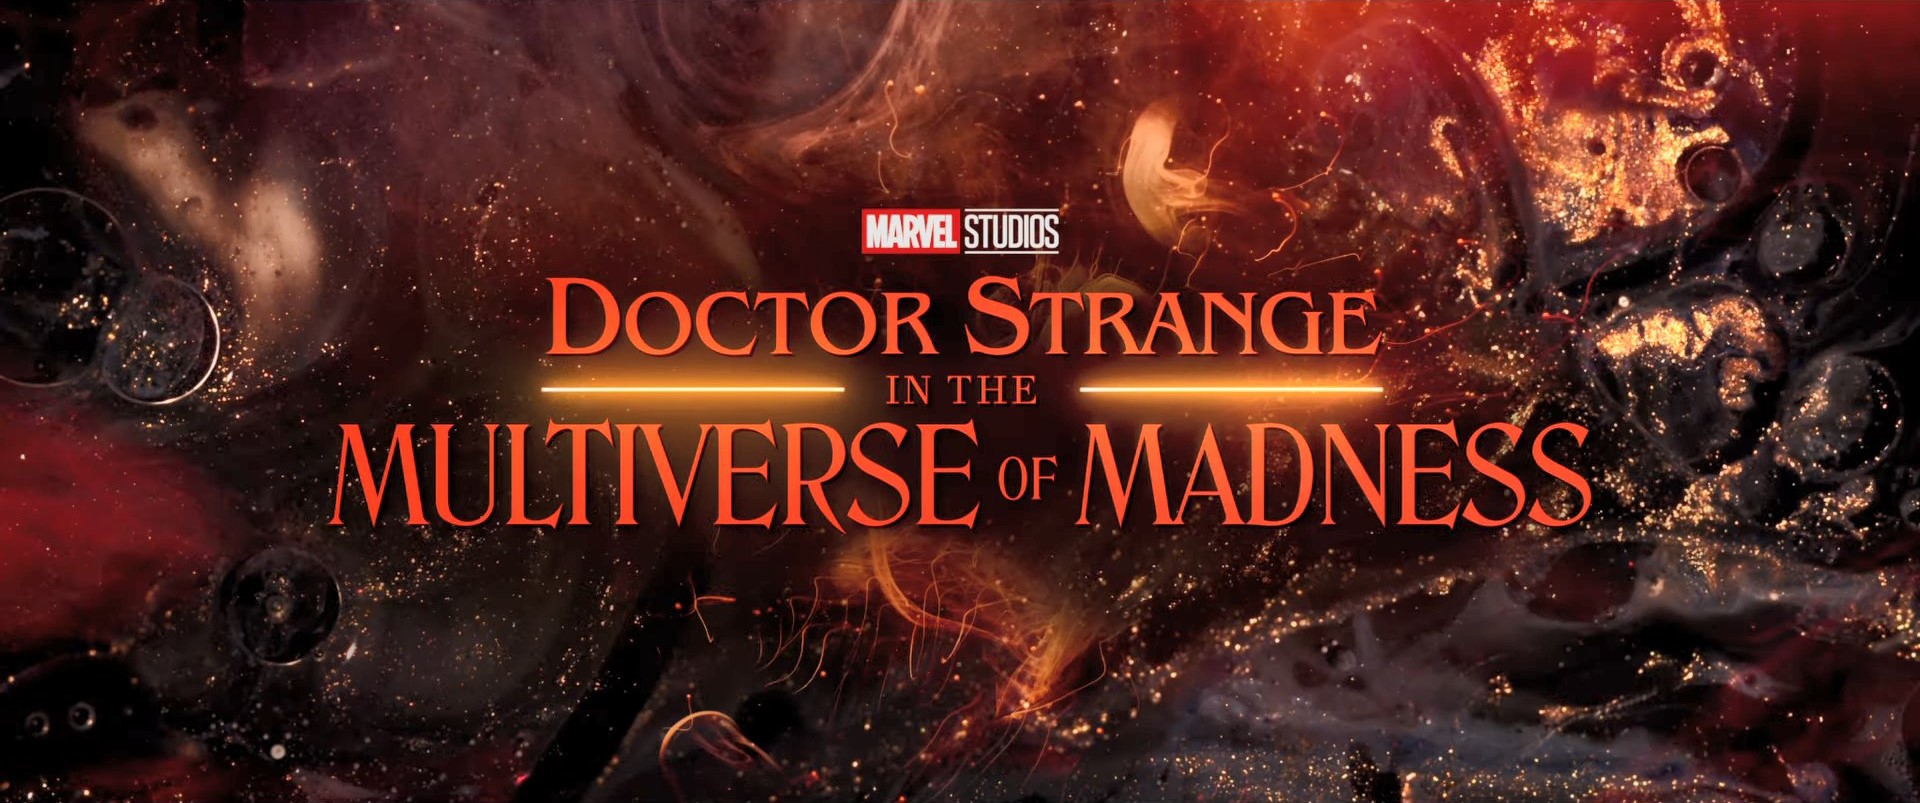 Doctor Strange in the Multiverse of Madness' official teaser and poster